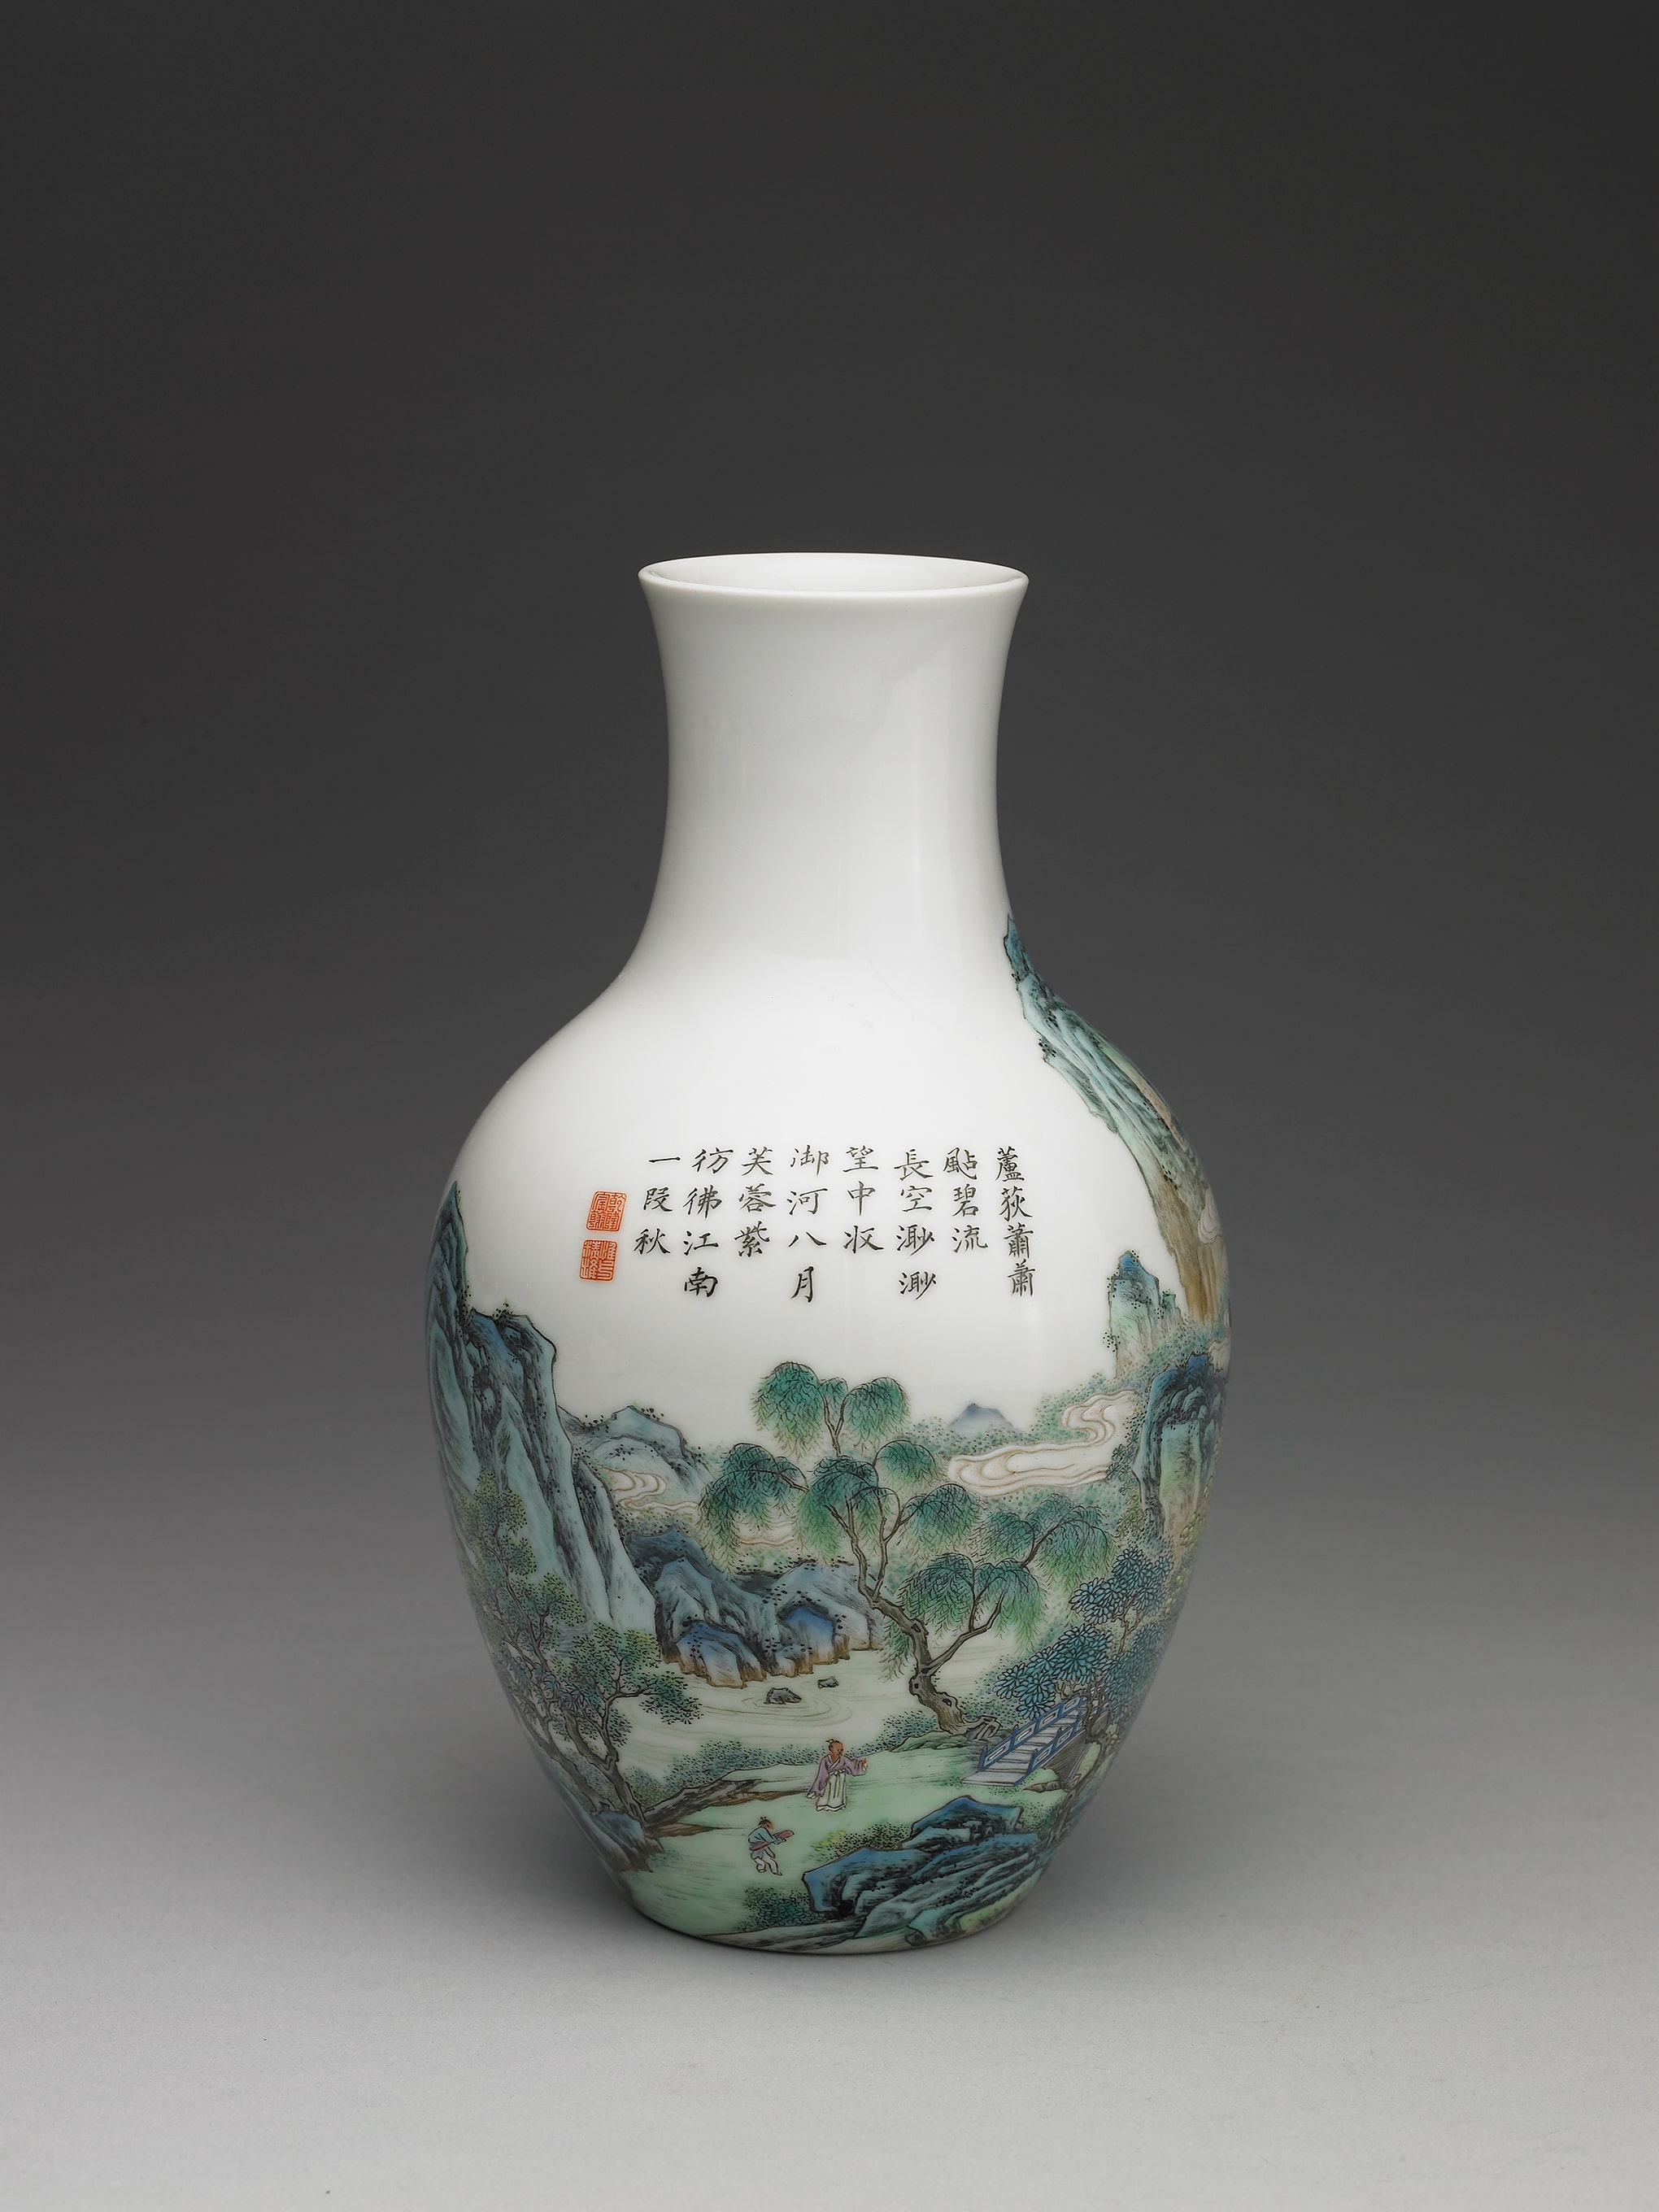 Guanyin vase with landscape and figure in yangcai painted enamels